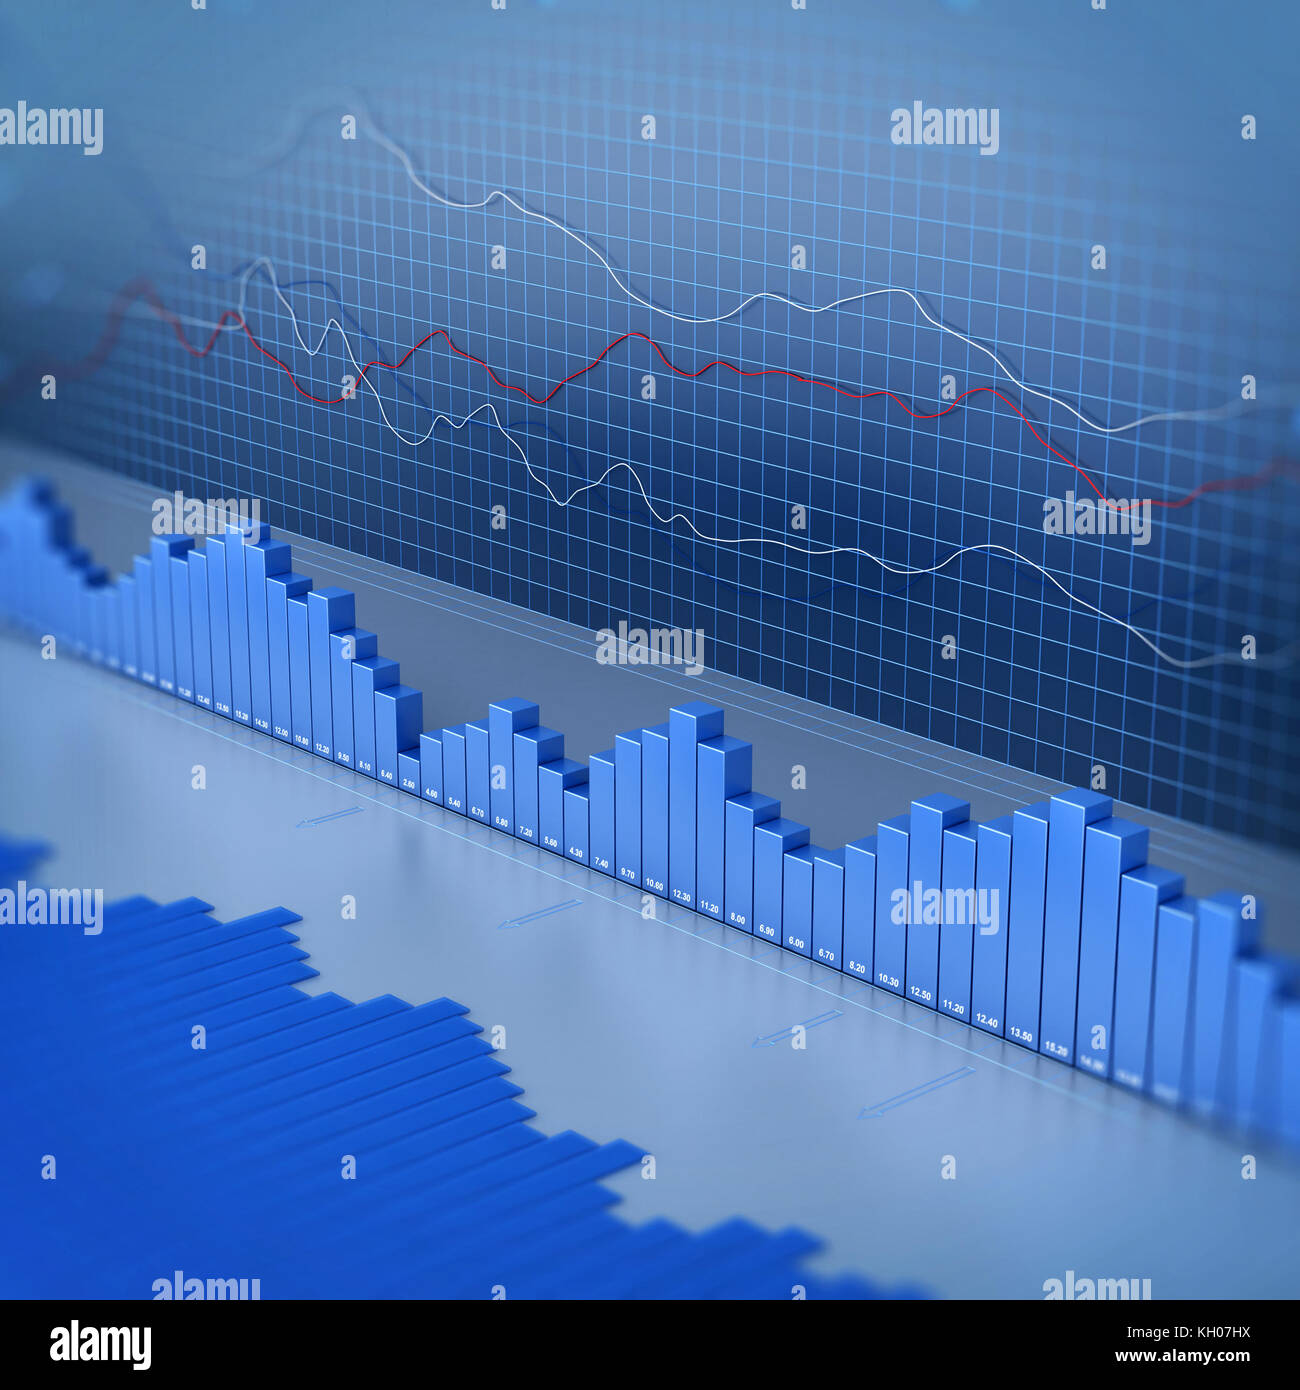 Finance diagram. 3d rendering image technology background Stock Photo